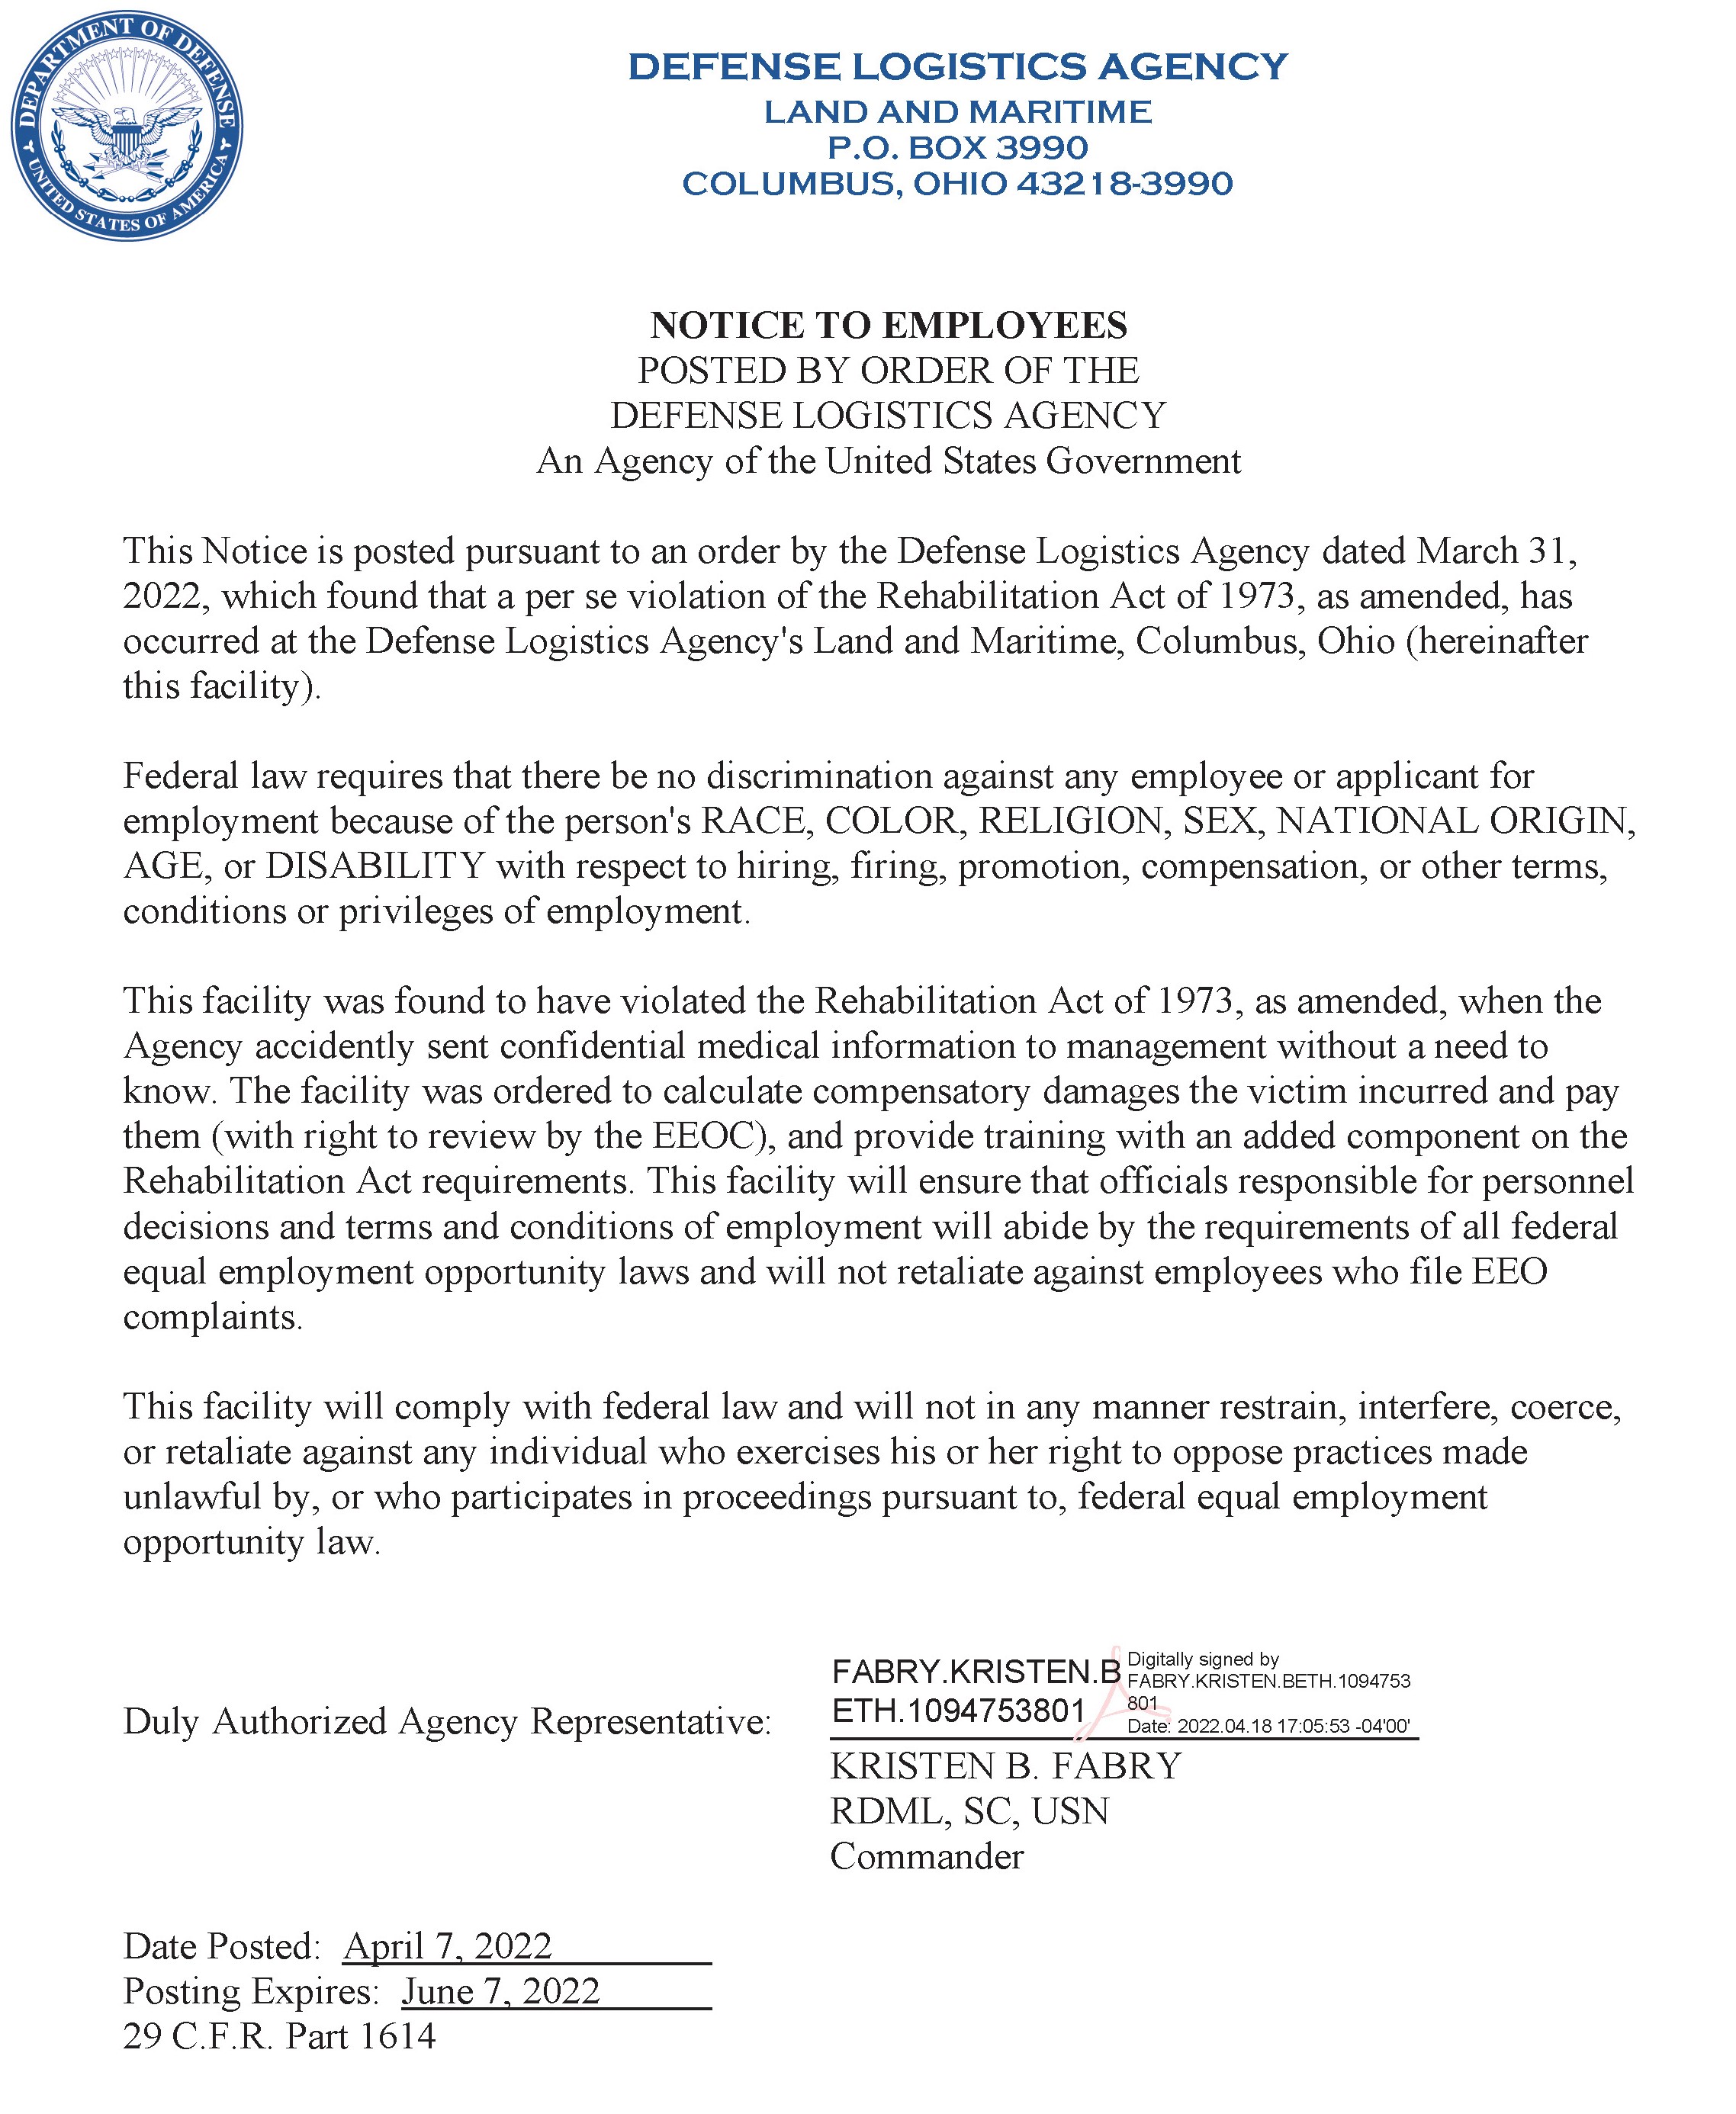 NOTICE TO EMPLOYEES POSTED BY ORDER OF THE DEFENSE LOGISTICS AGENCY An Agency of the United States Government This Notice is posted pursuant to an order by the Defense Logistics Agency dated March 31, 2022, which found that a per se violation of the Rehabilitation Act of 1973, as amended, has occurred at the Defense Logistics Agency's Land and Maritime, Columbus, Ohio (hereinafter this facility). Federal law requires that there be no discrimination against any employee or applicant for employment because of the person's RACE, COLOR, RELIGION, SEX, NATIONAL ORIGIN, AGE, or DISABILITY with respect to hiring, firing, promotion, compensation, or other terms, conditions or privileges of employment. This facility was found to have violated the Rehabilitation Act of 1973, as amended, when the Agency accidently sent confidential medical information to management without a need to know. The facility was ordered to calculate compensatory damages the victim incurred and pay them (with right to review by the EEOC), and provide training with an added component on the Rehabilitation Act requirements. This facility will ensure that officials responsible for personnel decisions and terms and conditions of employment will abide by the requirements of all federal equal employment opportunity laws and will not retaliate against employees who file EEO complaints. This facility will comply with federal law and will not in any manner restrain, interfere, coerce, or retaliate against any individual who exercises his or her right to oppose practices made unlawful by, or who participates in proceedings pursuant to, federal equal employment opportunity law. Duly Authorized Agency Representative: KRISTEN B. FABRY RDML, SC, USN Commander Date Posted: April 7, 2022 Posting Expires: June 7, 2022 29 C.F.R. Part 1614 FABRY.KRISTEN.B ETH.1094753801 Digitally signed by FABRY.KRISTEN.BETH.1094753 801 Date: 2022.04.18 17:05:53 -04'00